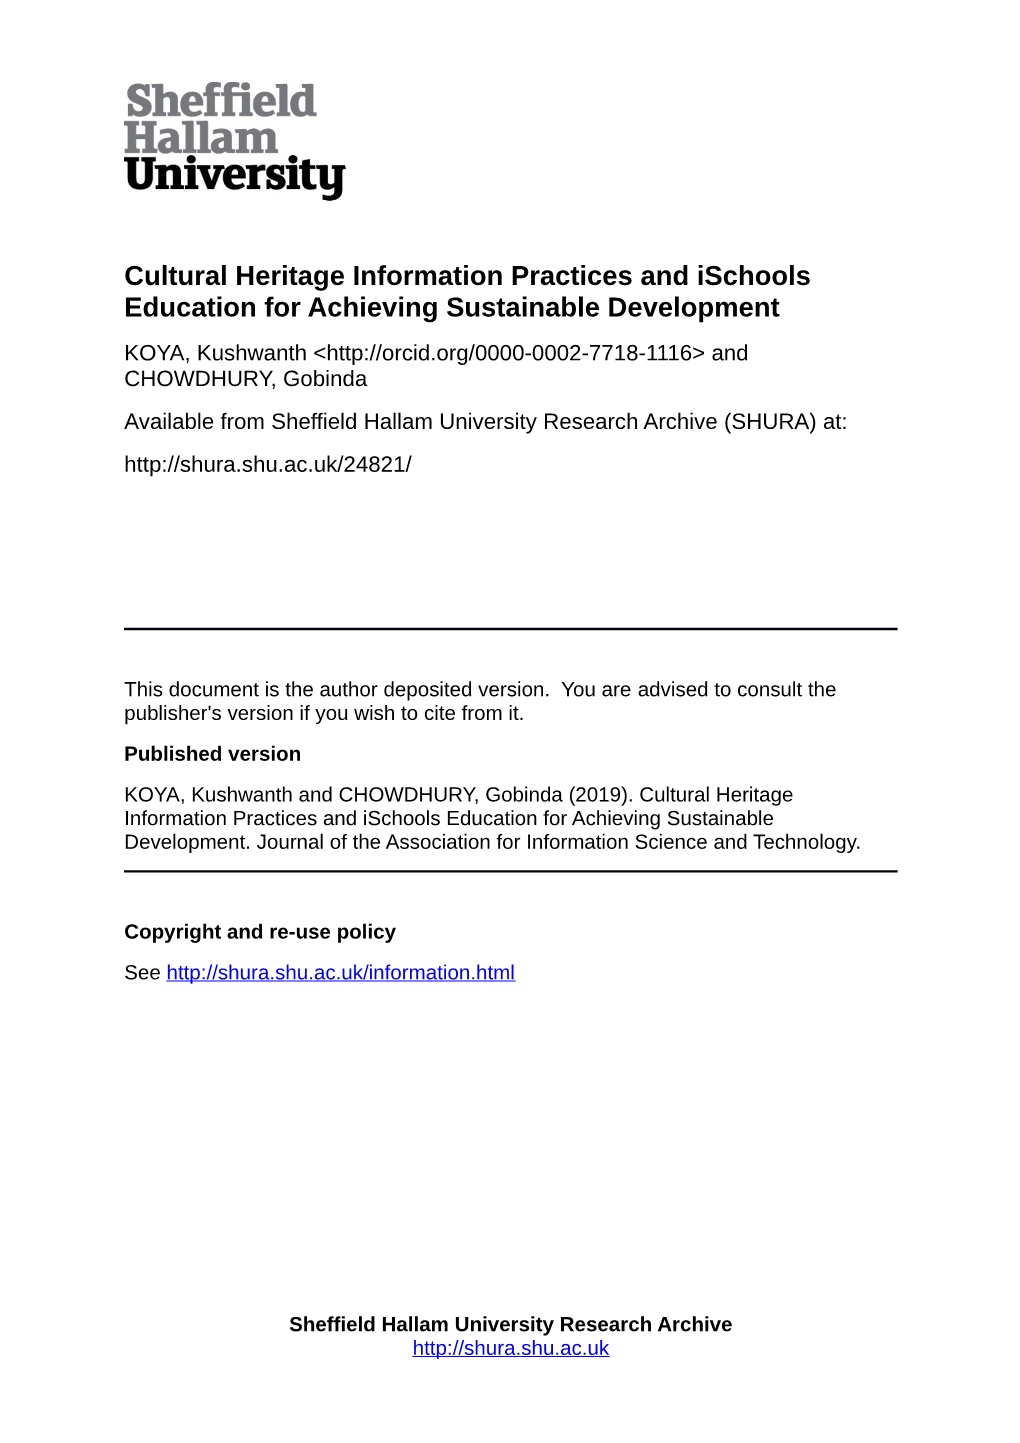 Cultural Heritage Information Practices and Ischools Education